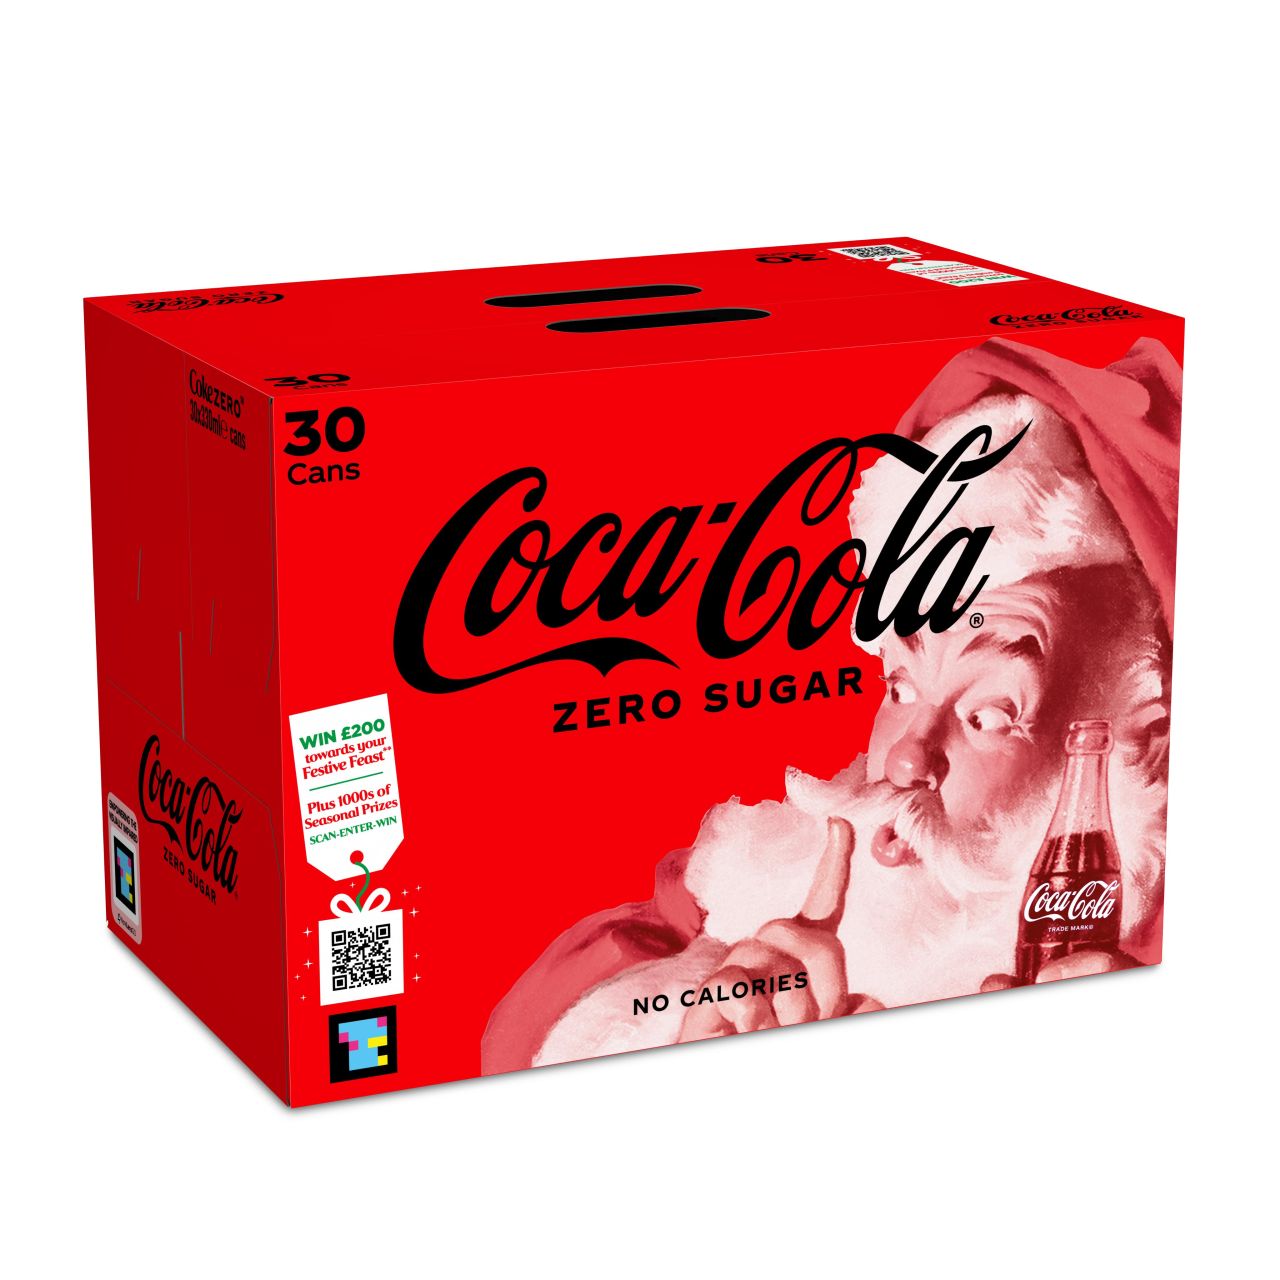 How Coca Cola makes routing easier for visually impaired consumers